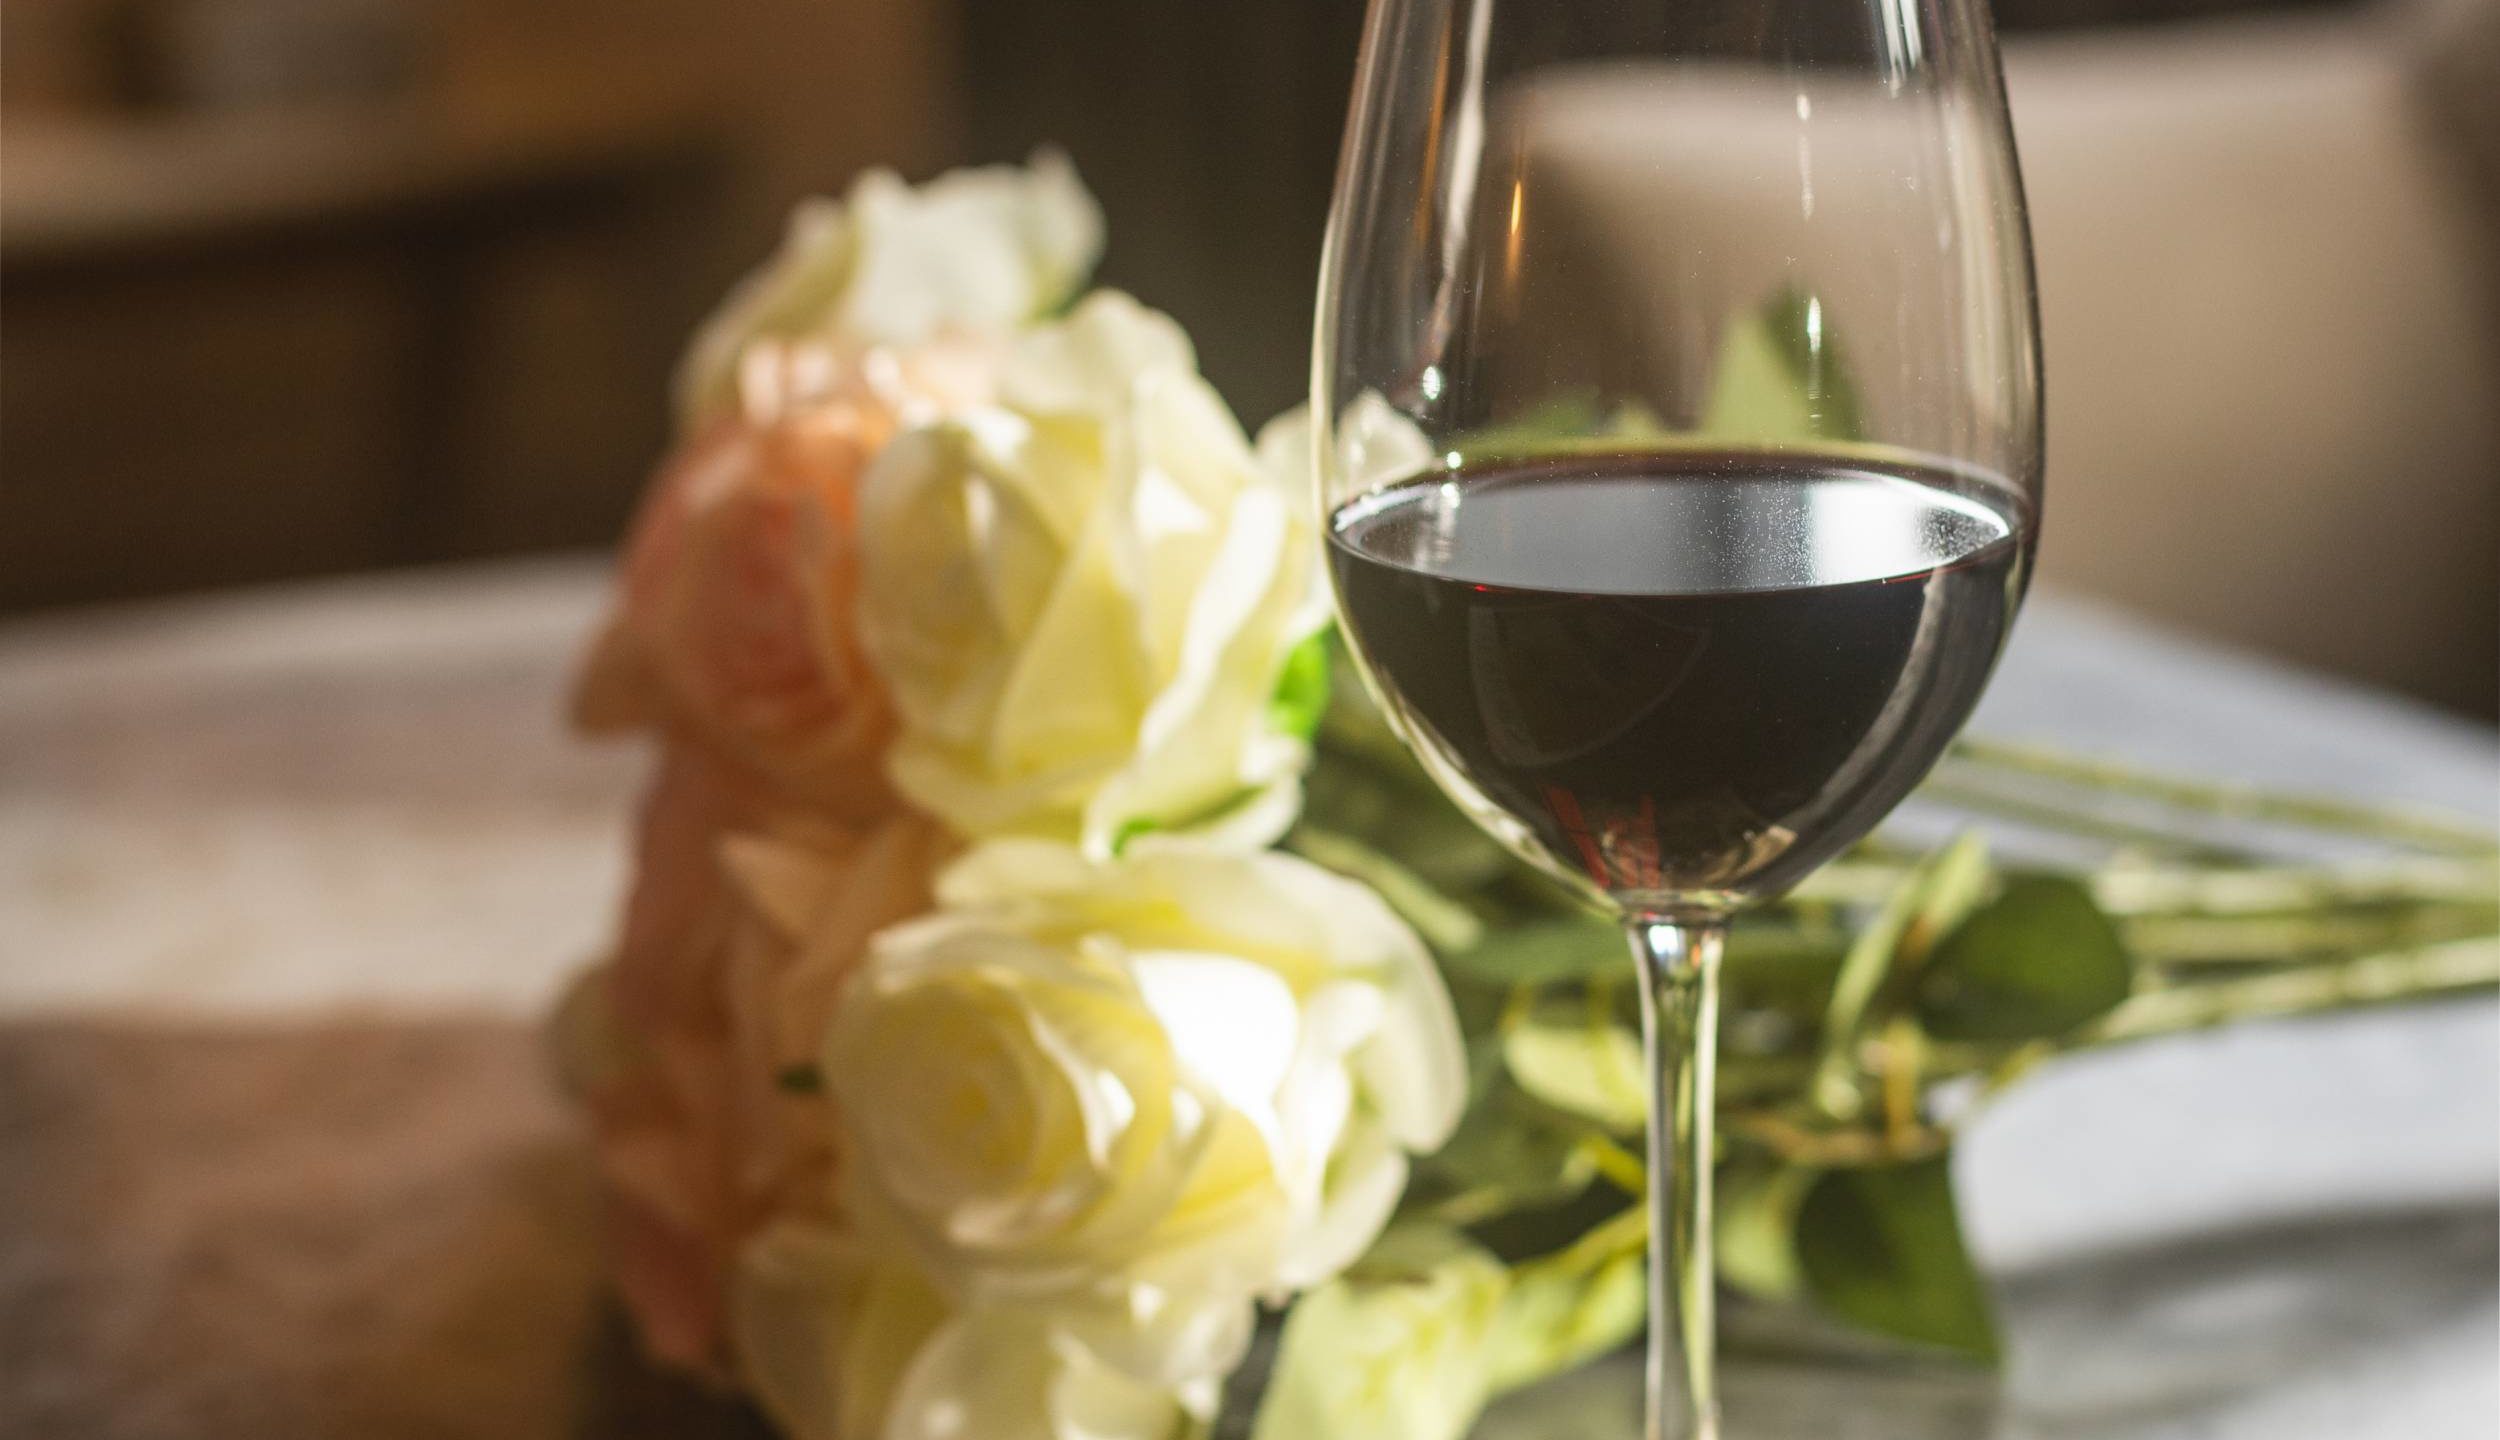 Glass of red wine on a table beside some flowers